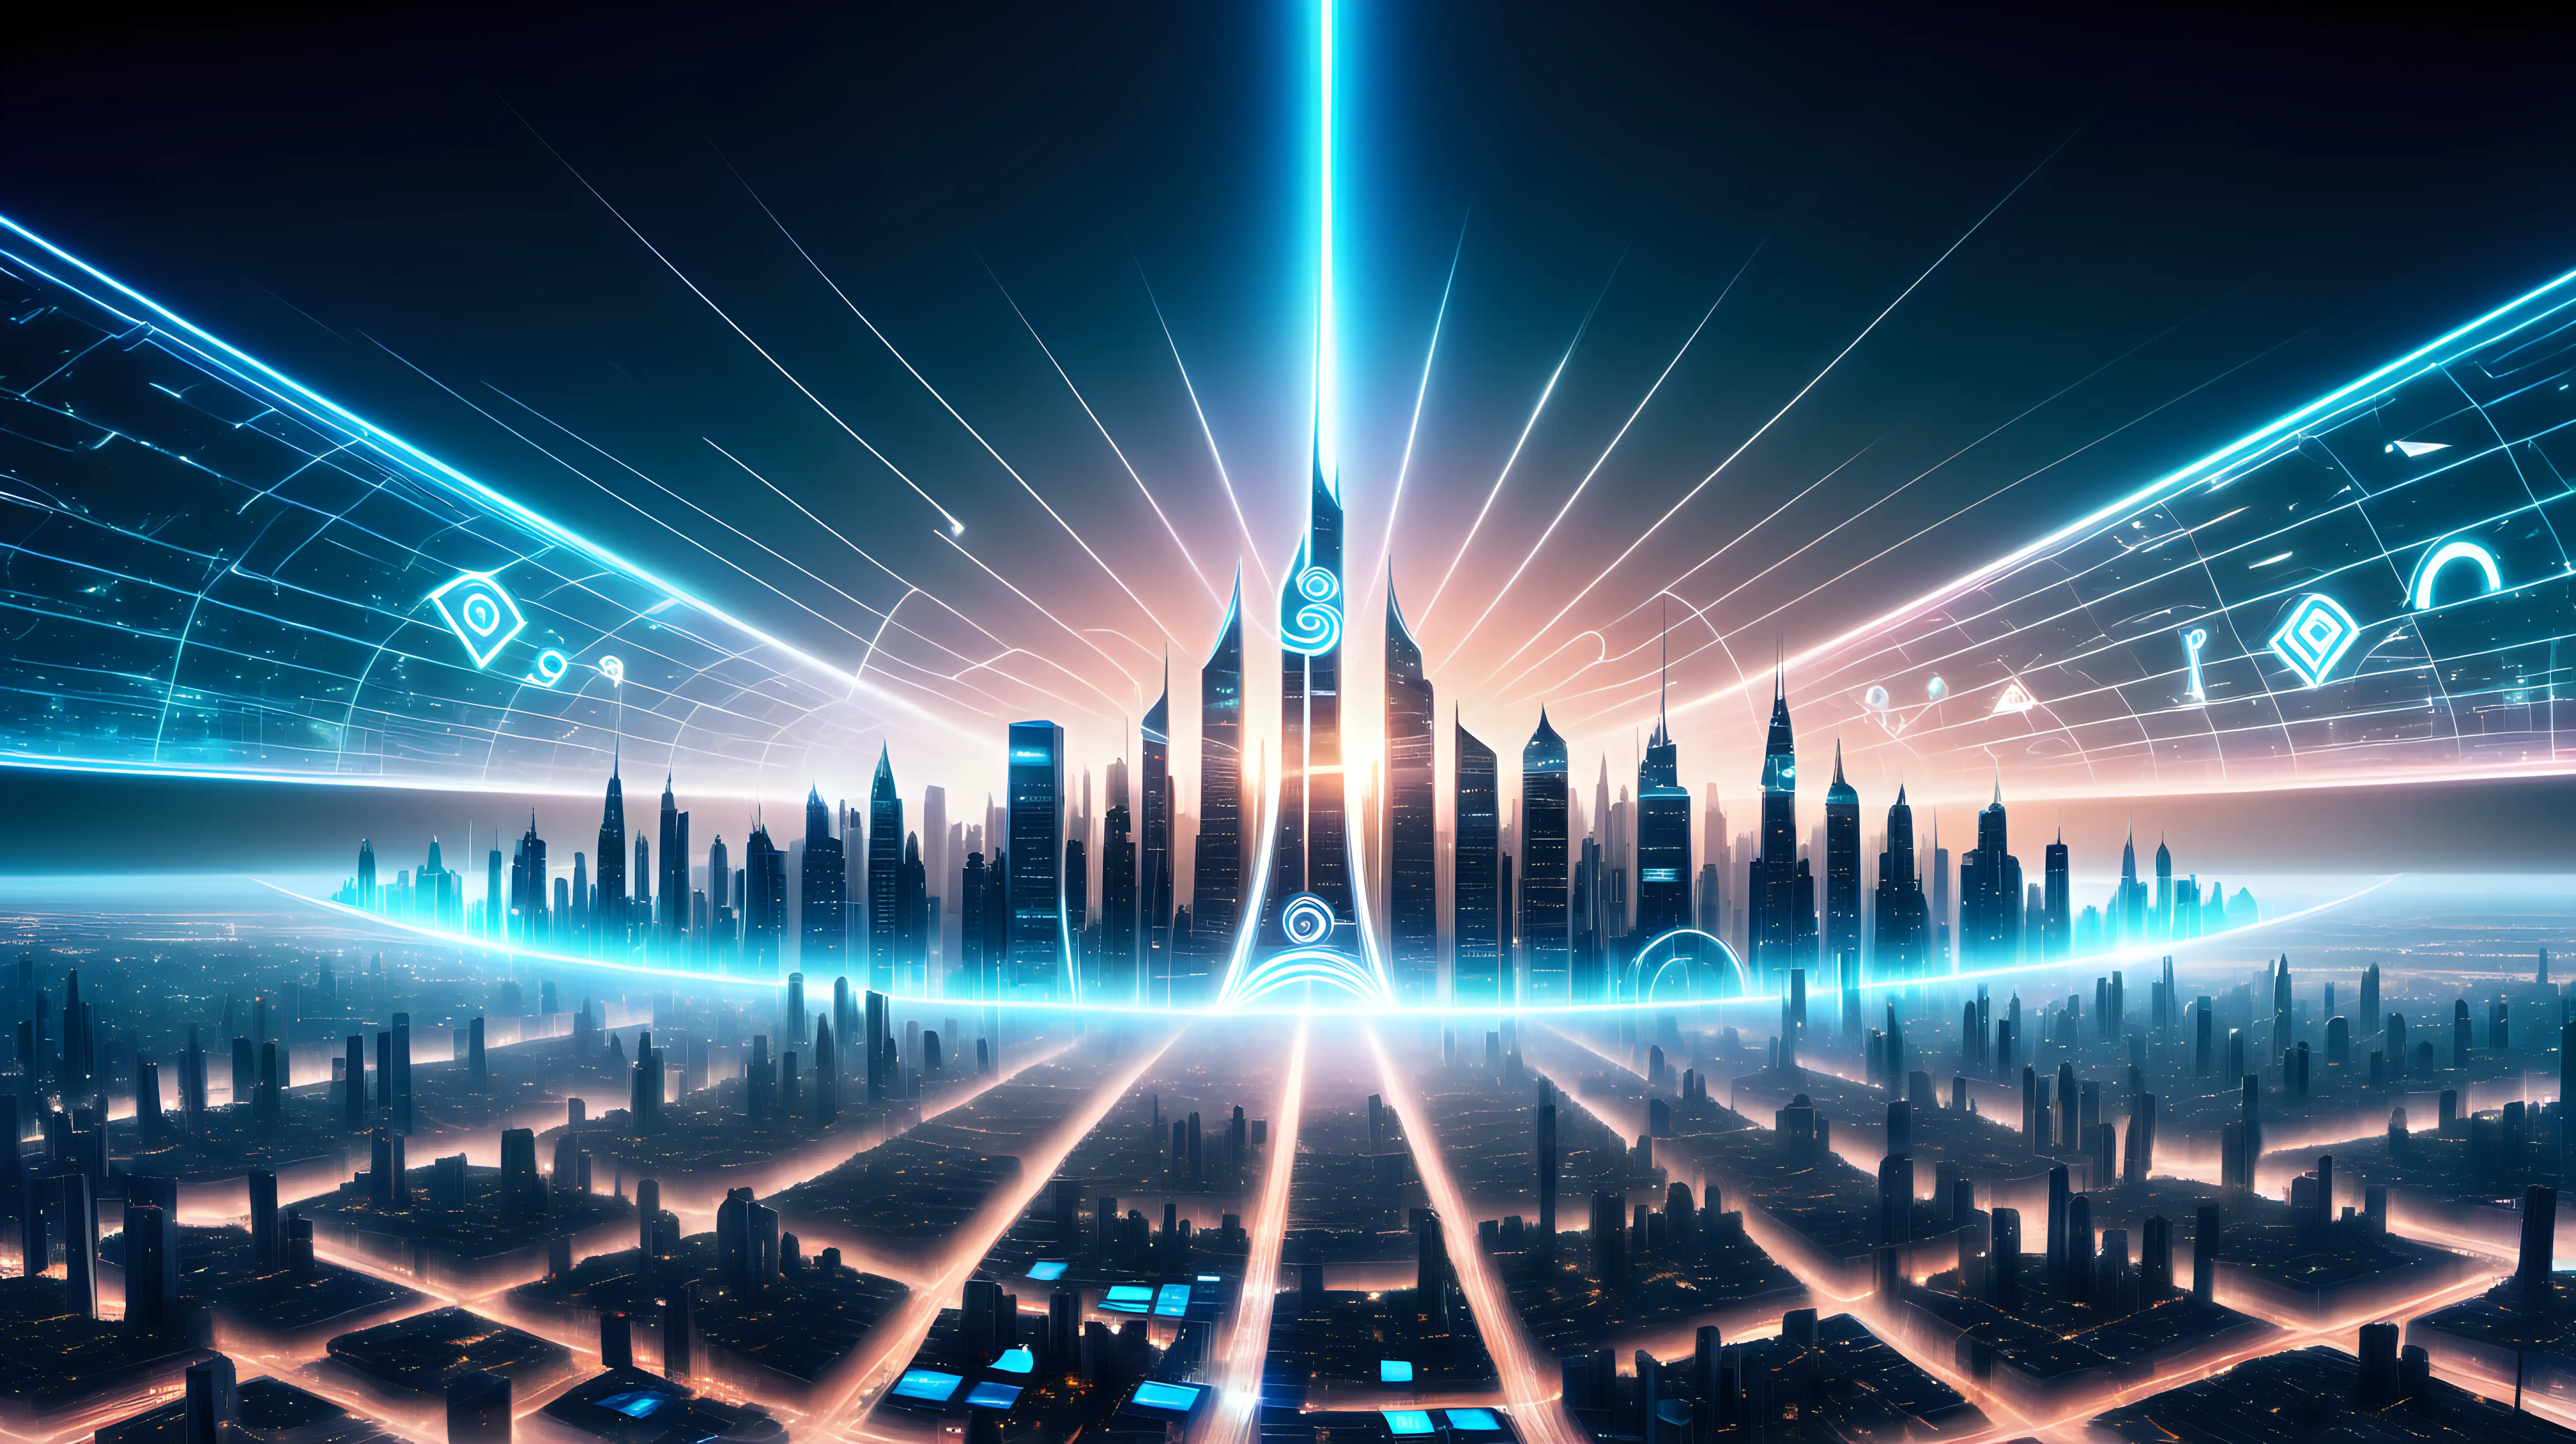 An awe-inspiring image of a sleek, futuristic cityscape with holographic A.I logos hovering in the skyline.